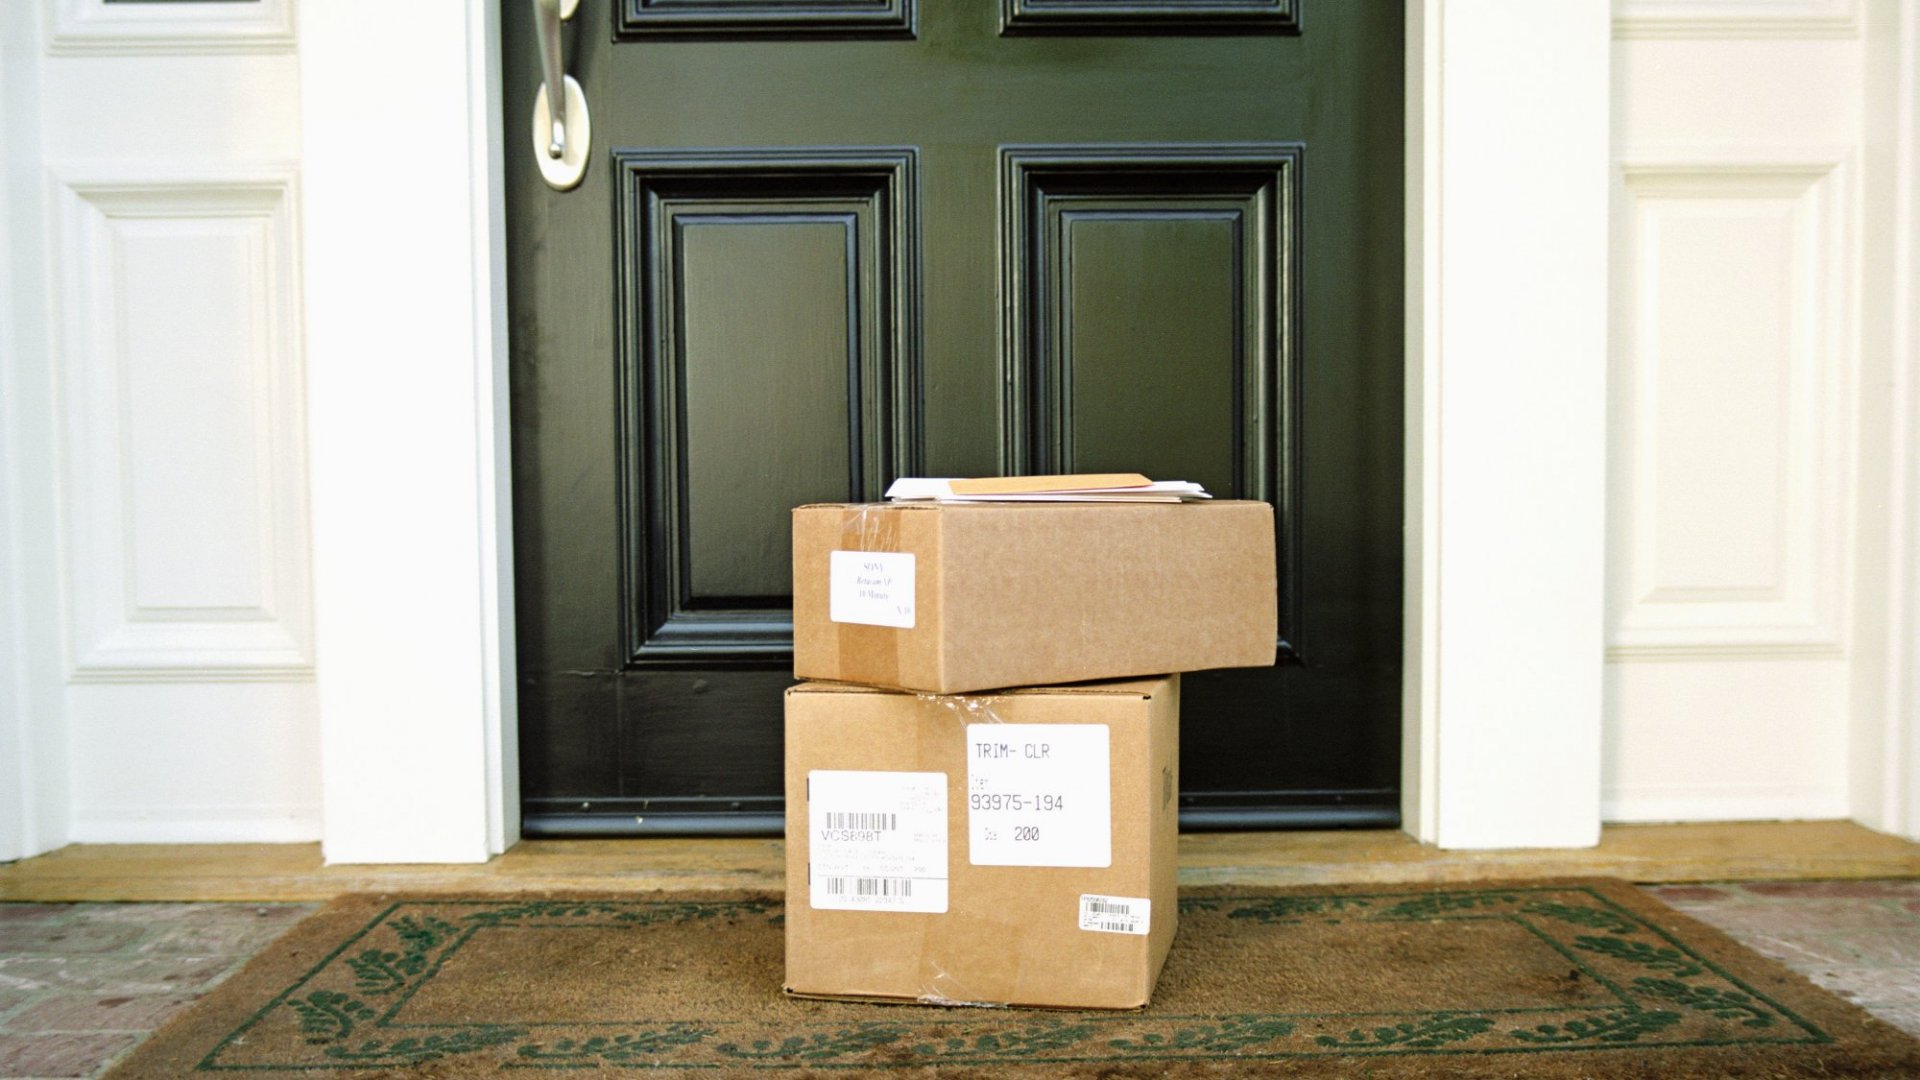 7 Ways to Protect Your Packages from Porch Pirates